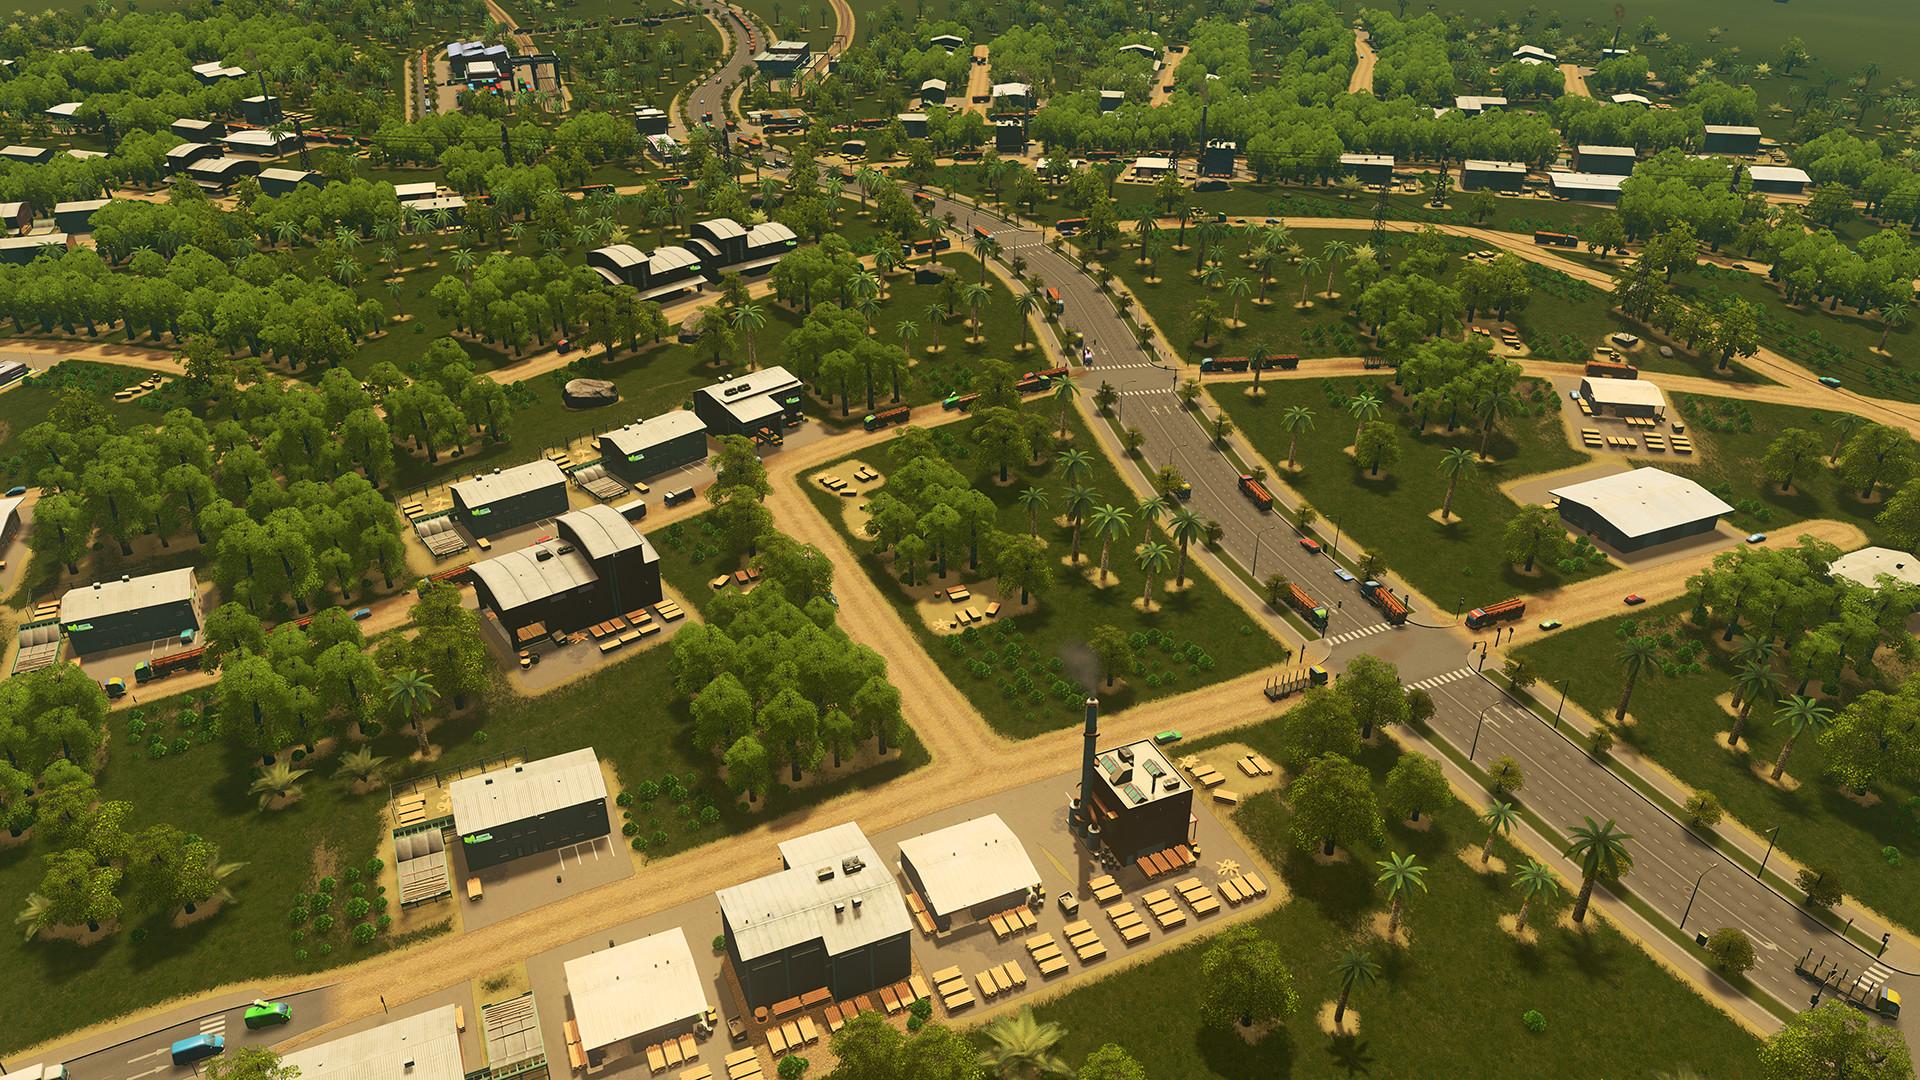 Screenshot №9 from game Cities: Skylines